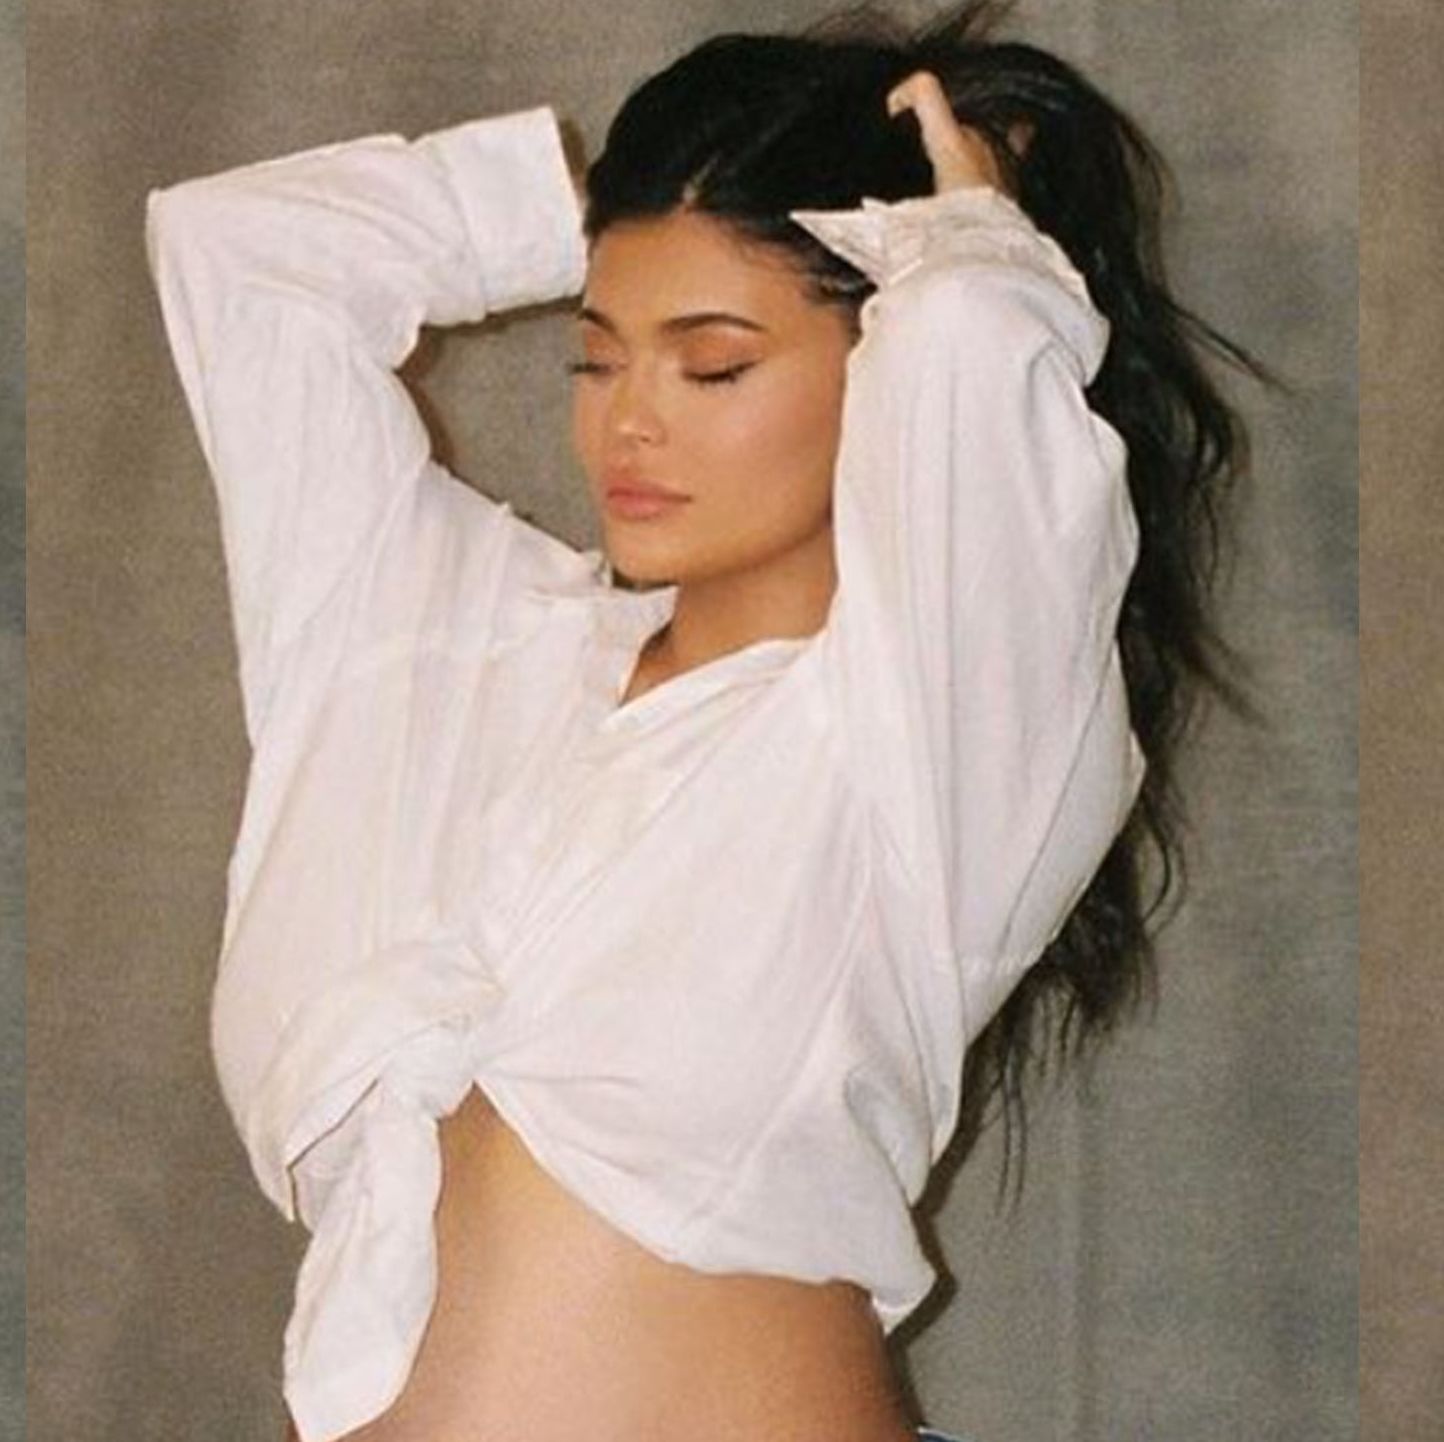 Some Fans Are Convinced Kylie Jenner Has Secretly Already Given Birth